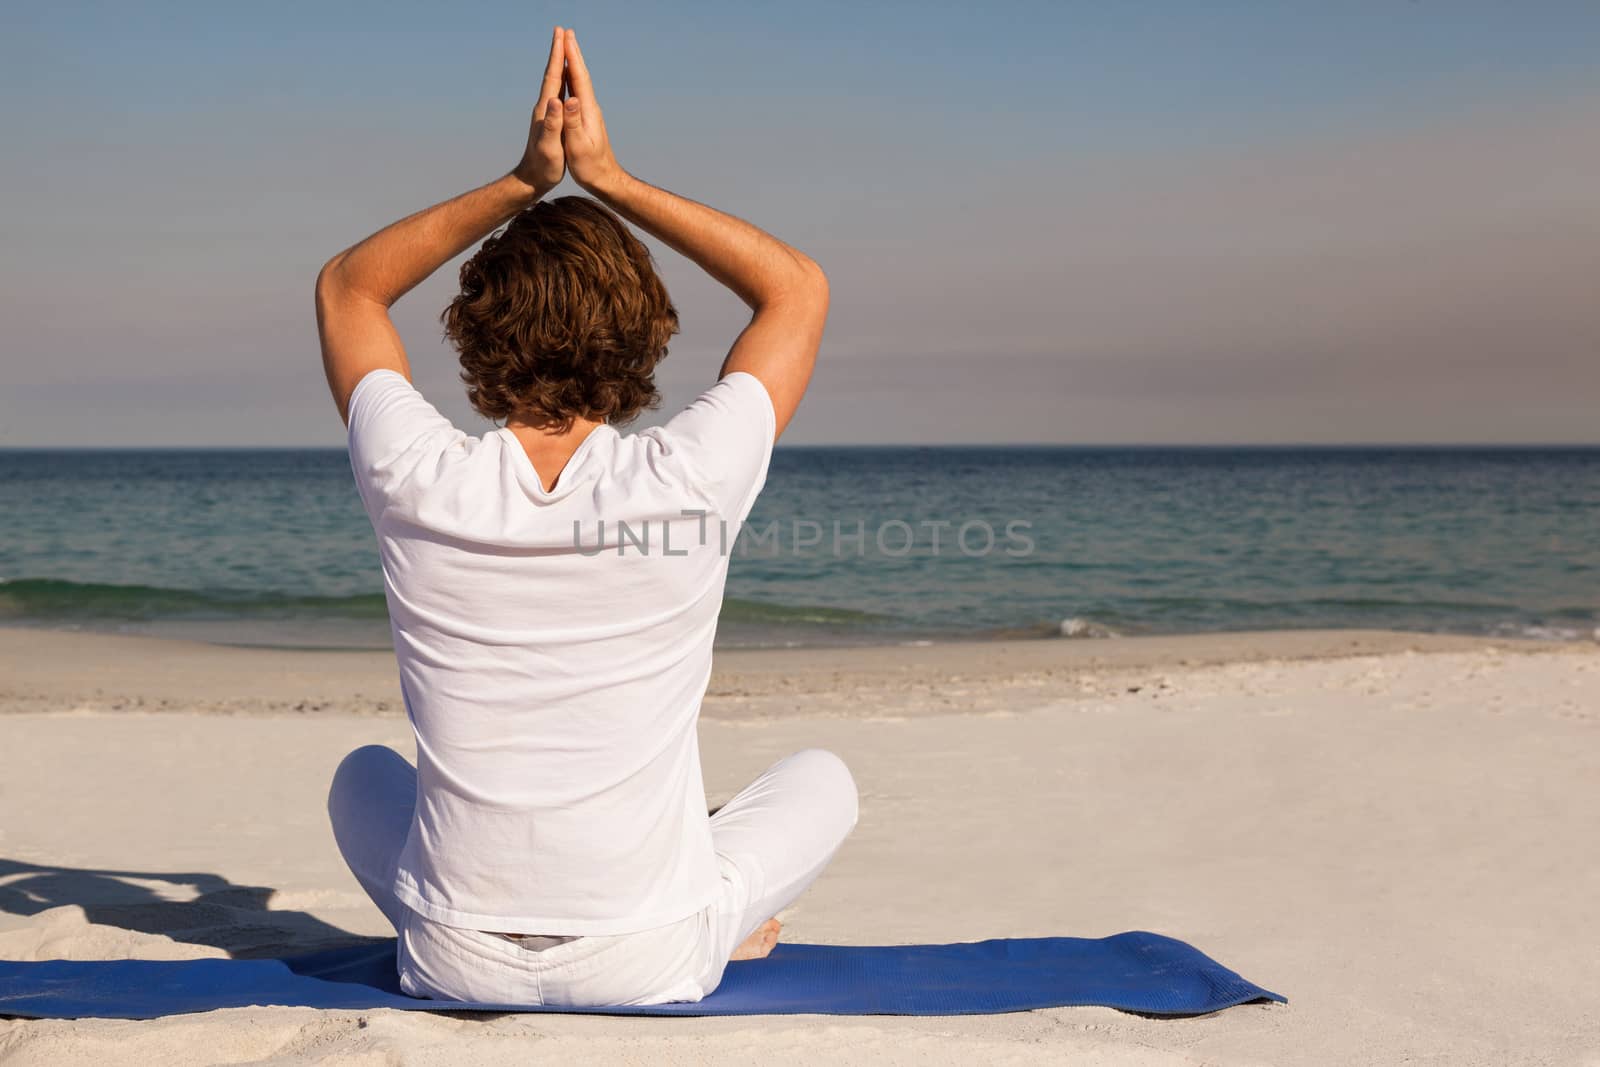 Rear view of man performing yoga at beach on sunny day